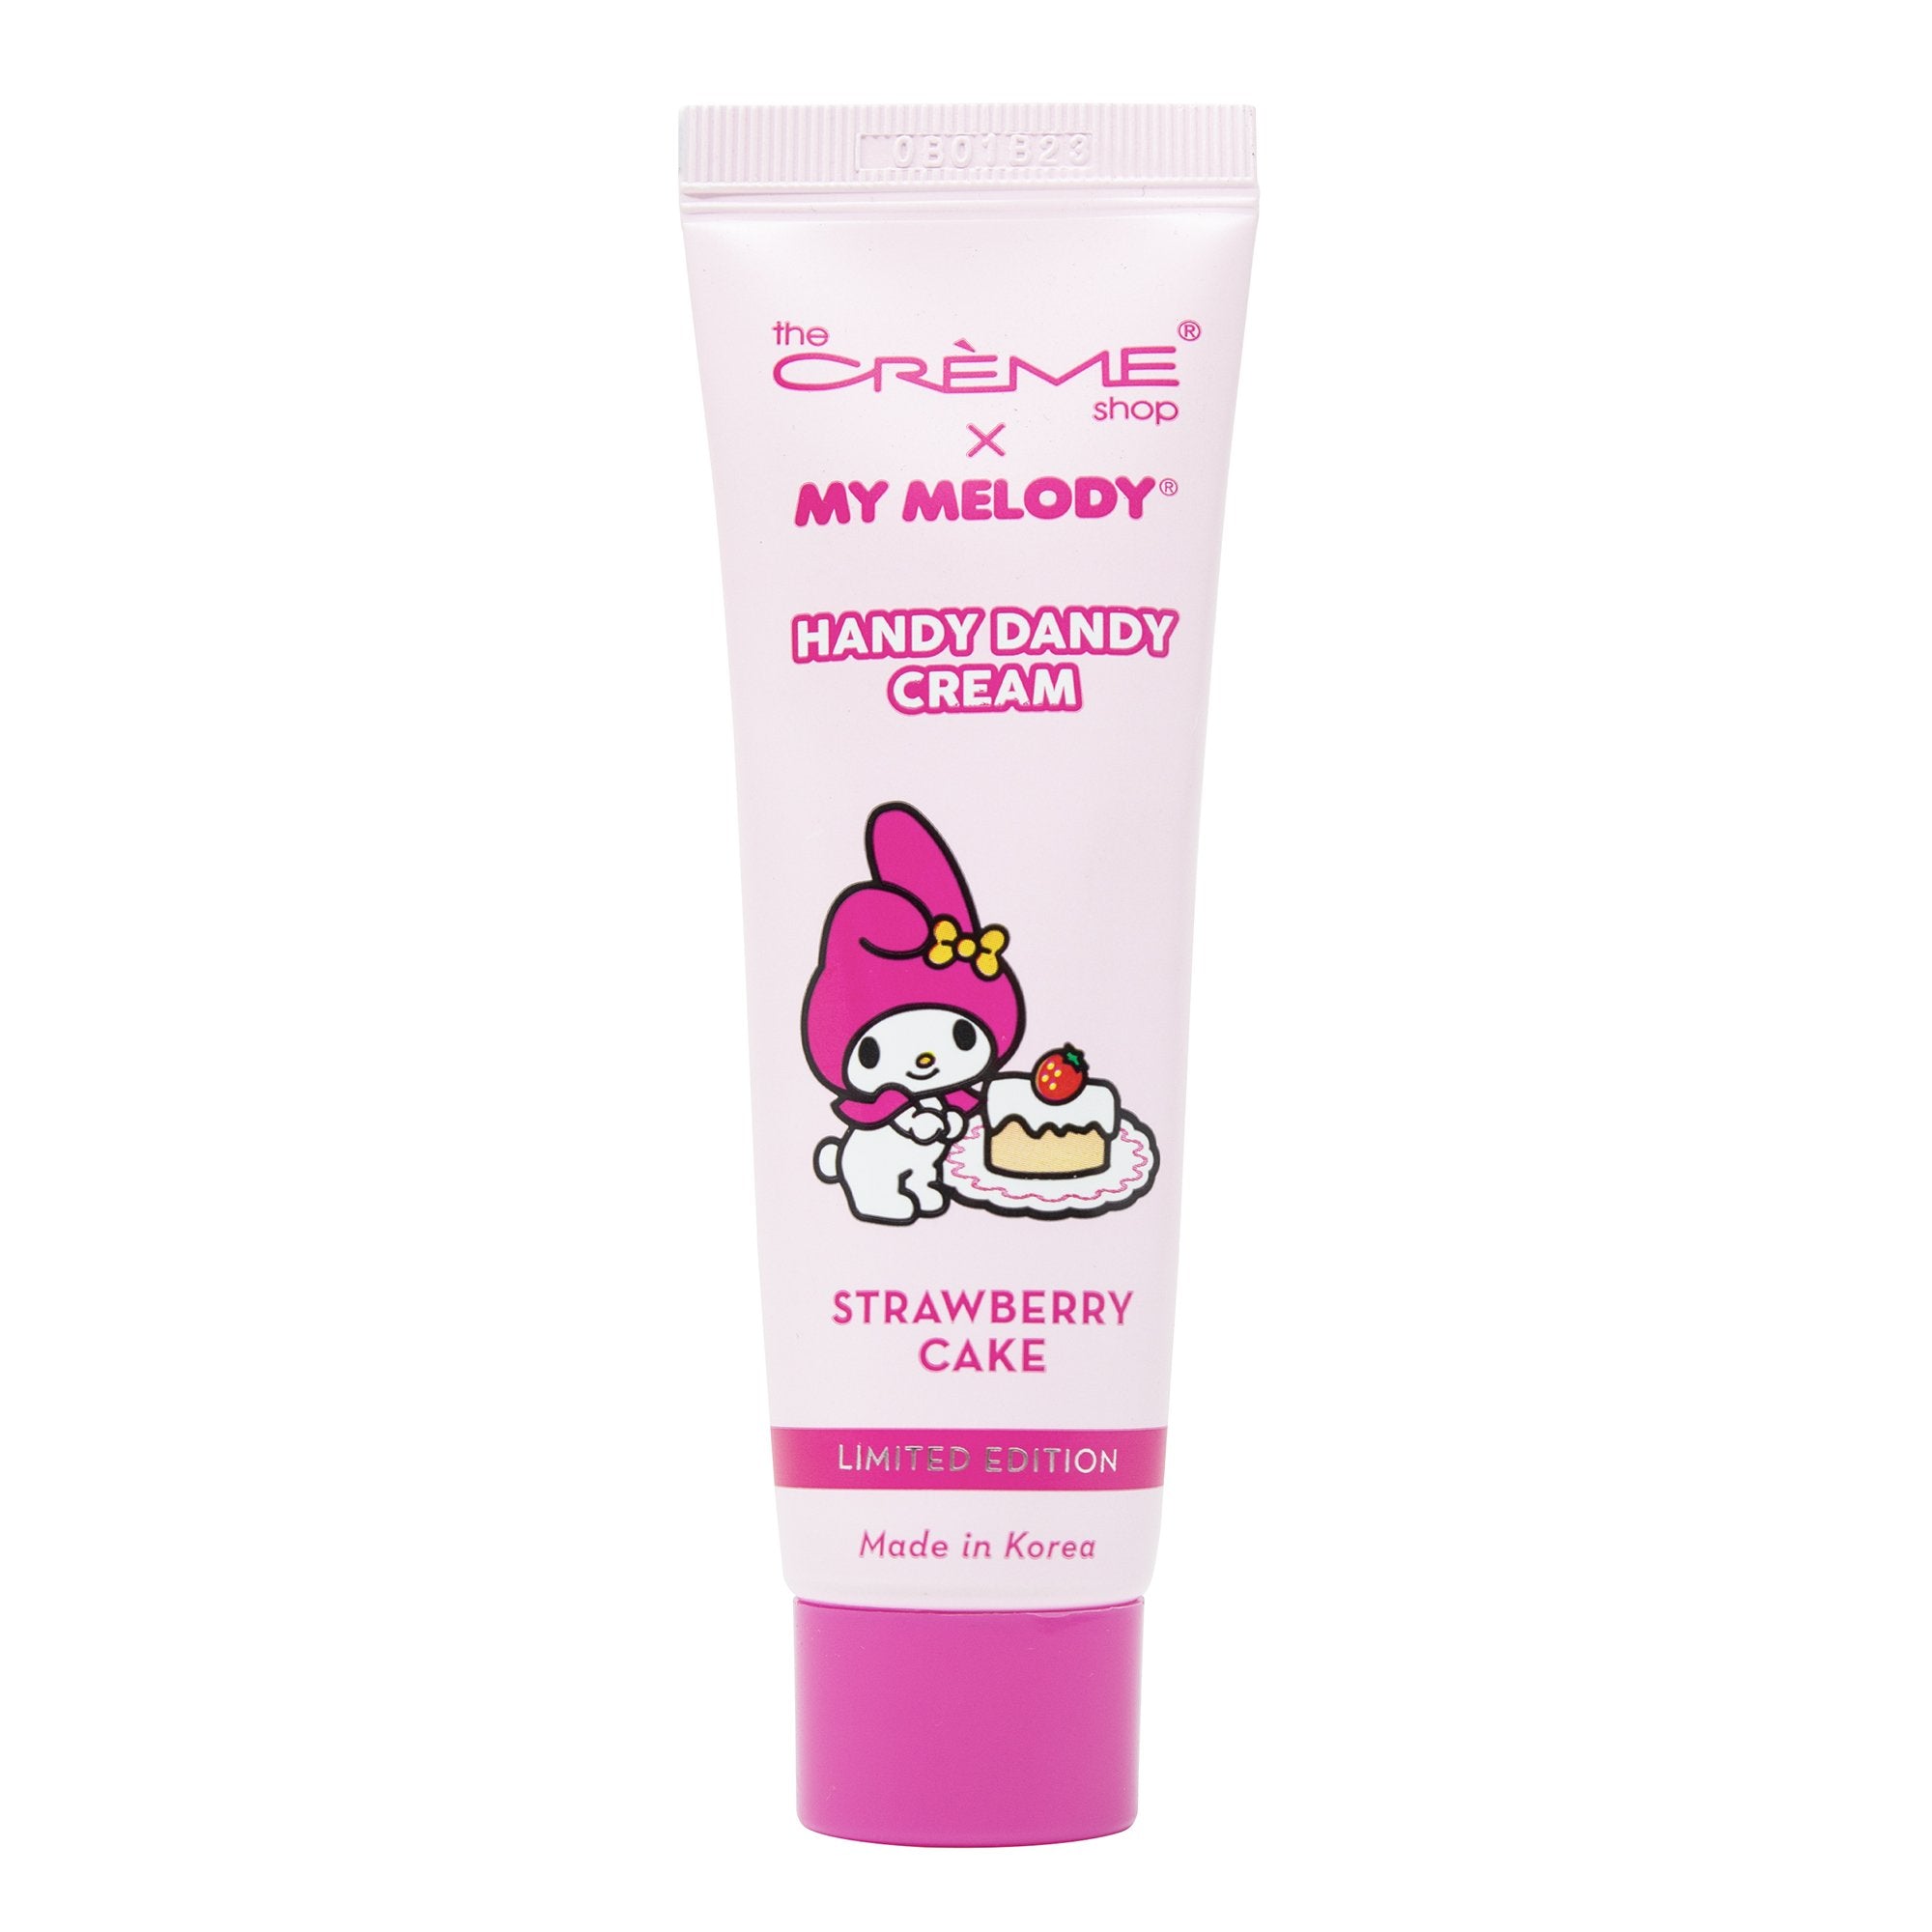 The Crème Shop x My Melody Handy Dandy Cream (Limited Edition) | Strawberry Cake (Travel-Sized) - The Crème Shop